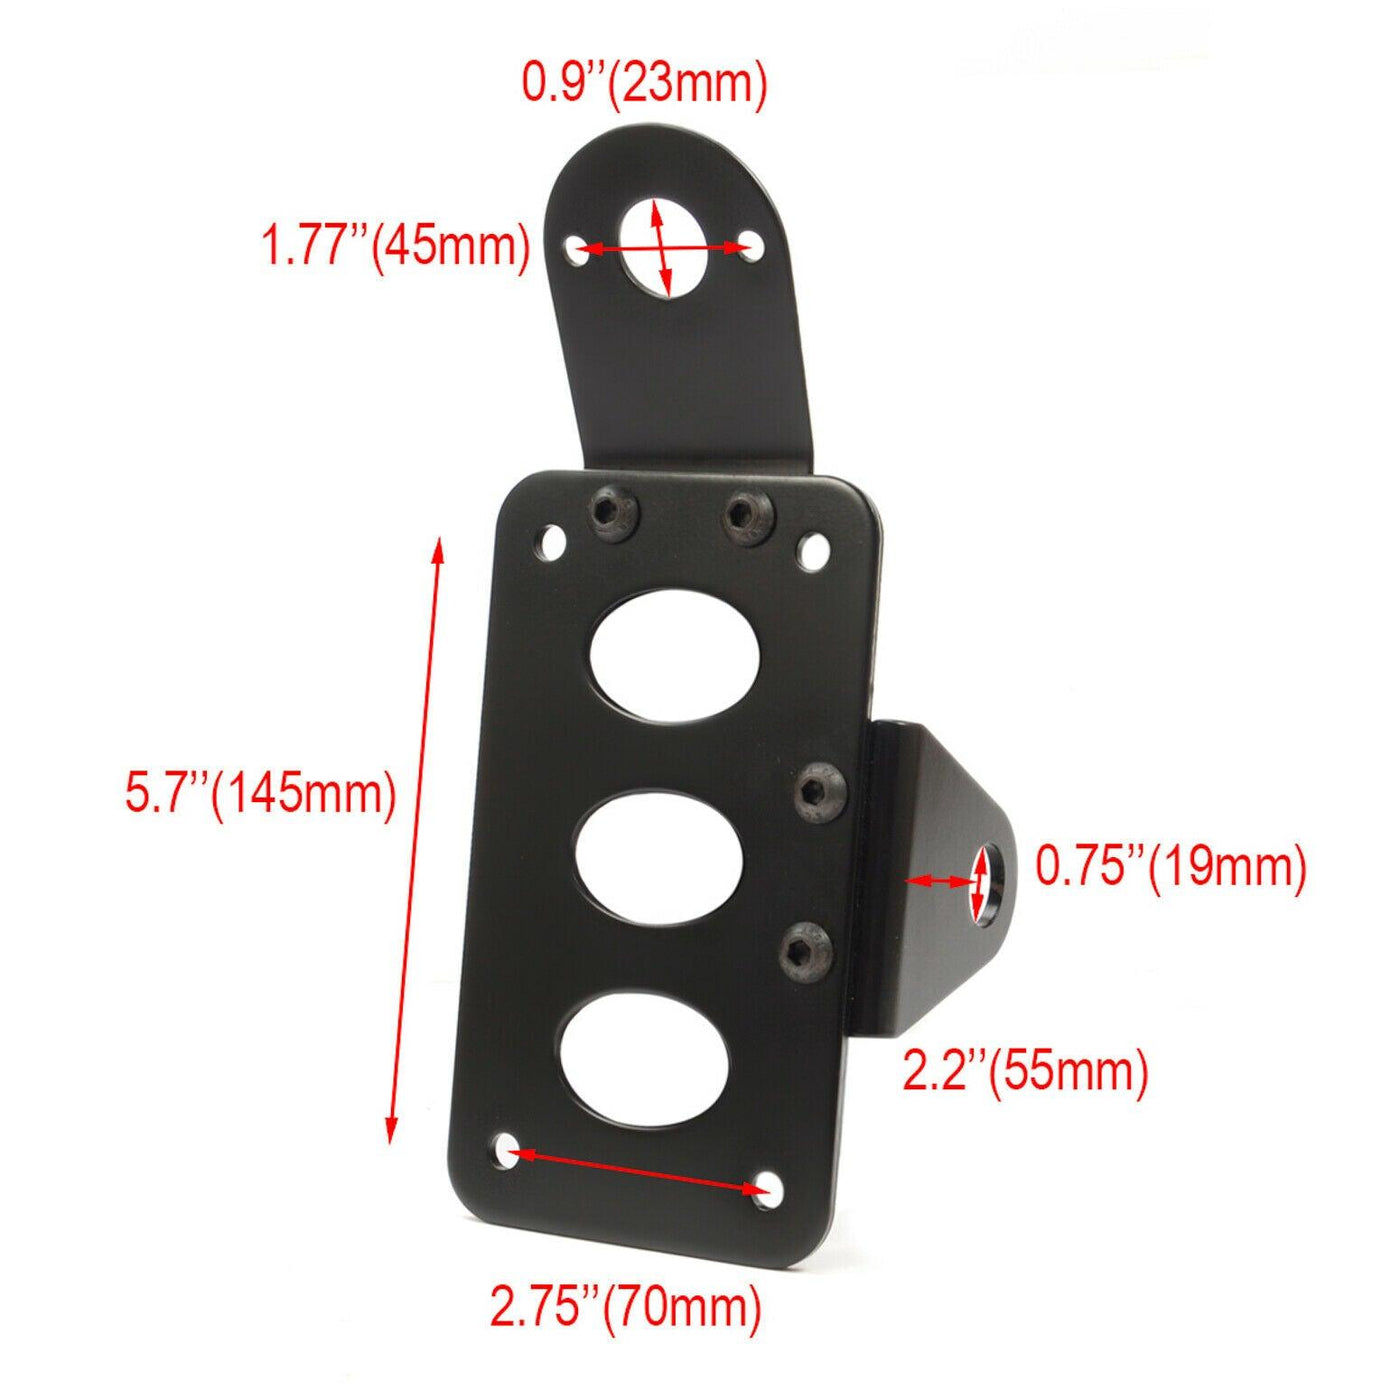 3/4" Axle LED Tail Light License Plate Bracket Side Holder Fit for Harley Yamaha - Moto Life Products